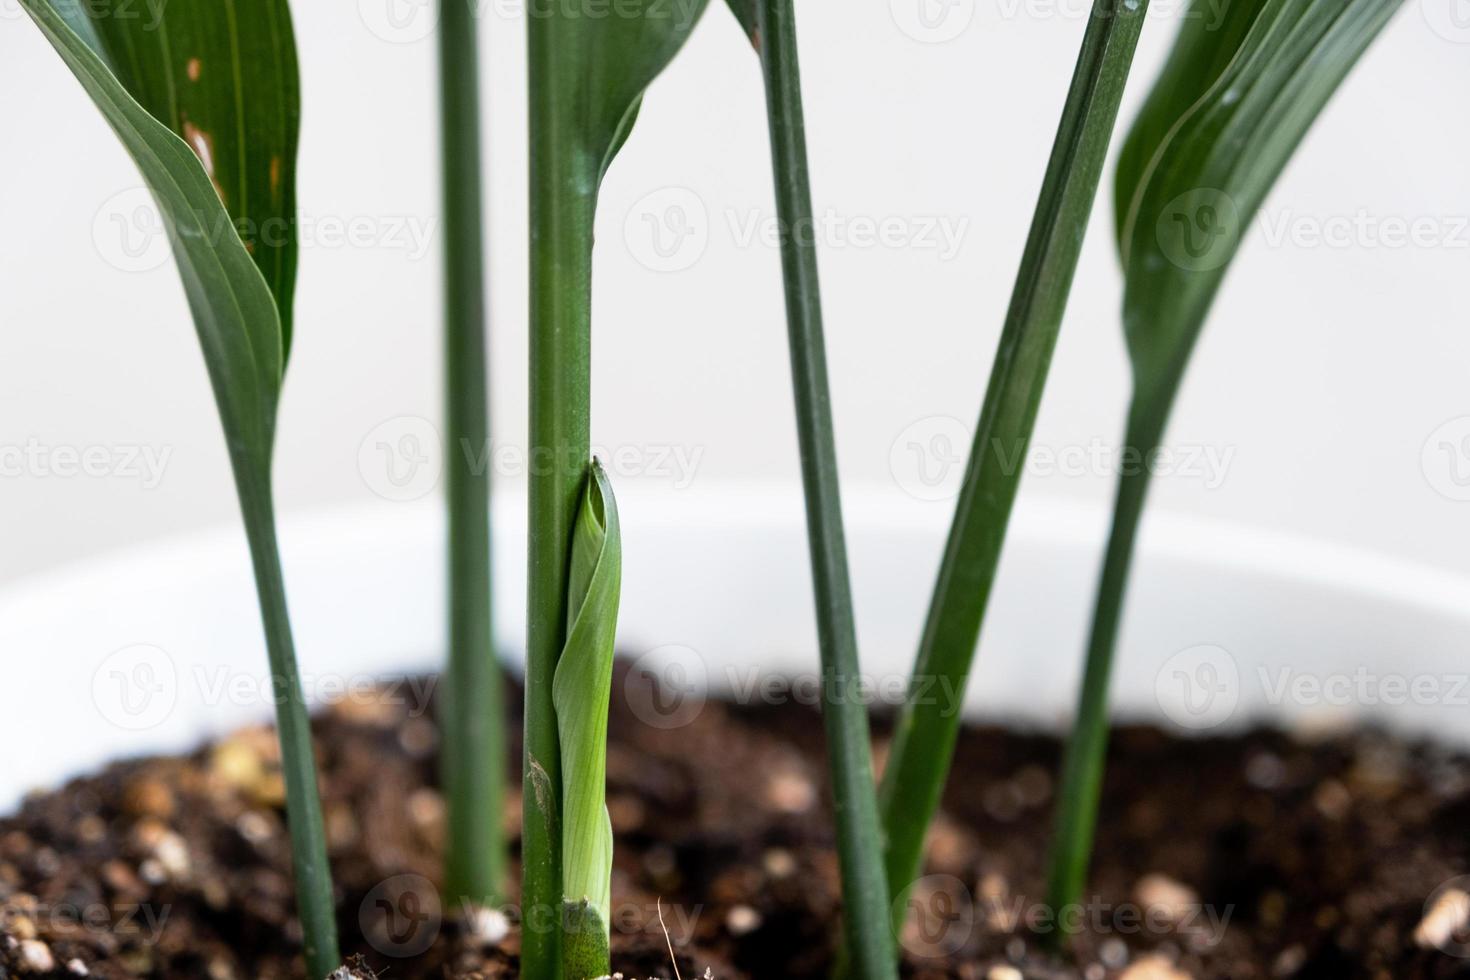 A new sprout of aspidistra close-up. A houseplant with stiff leaves and growing out of the ground. photo